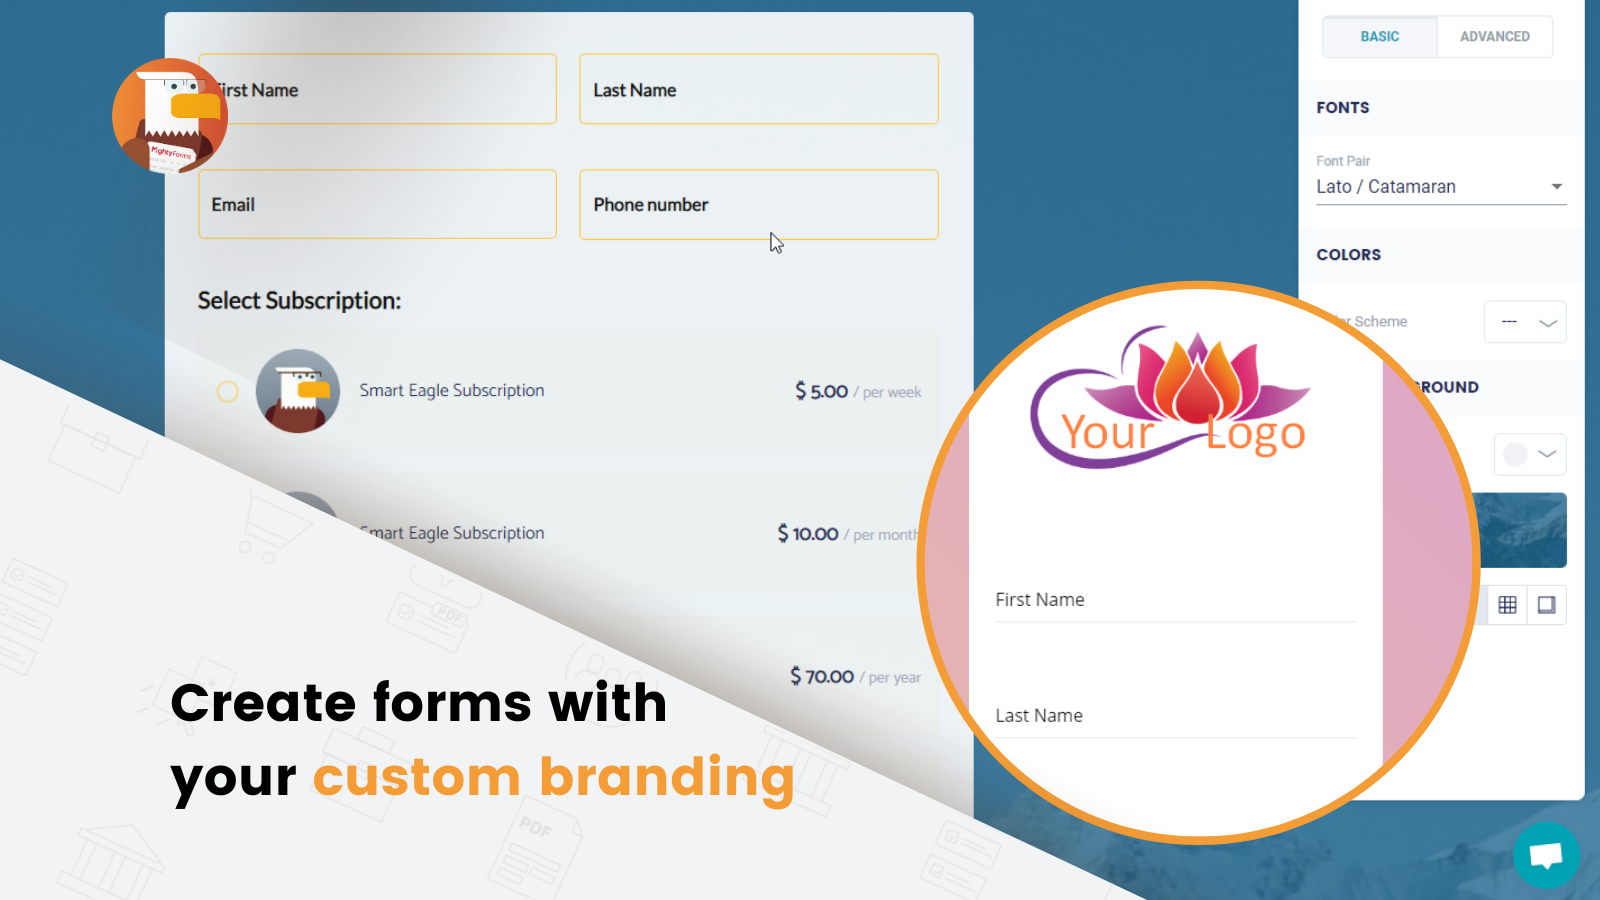  Drag & drop fields, customize your forms to match your branding